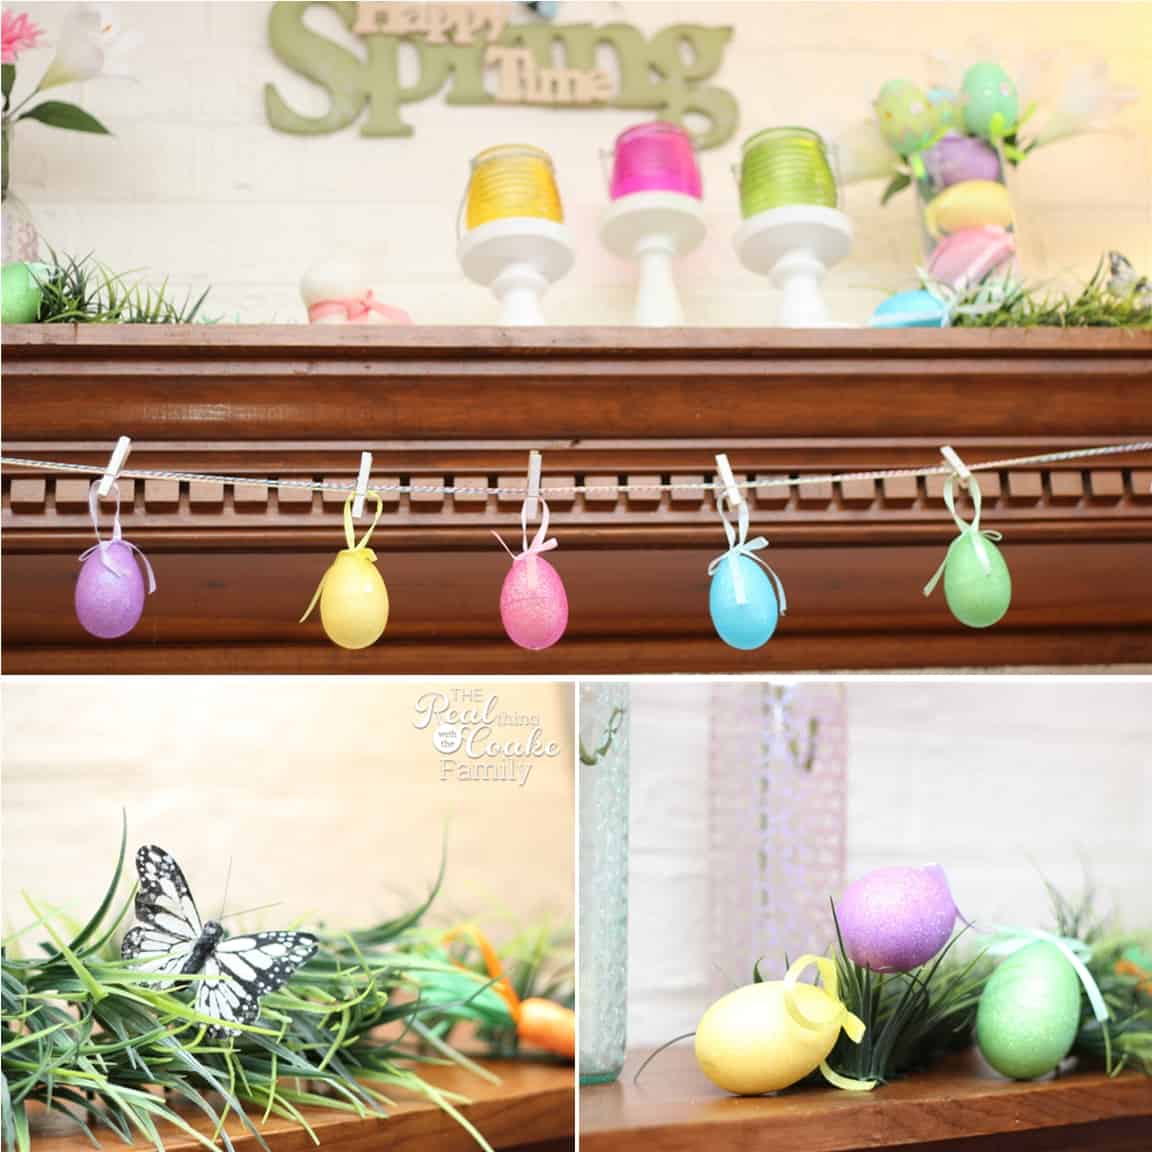 Ideas for a cheery, colorful, and pretty spring/Easter Mantel. #HomeDecor #Mantel #Easter #Spring #RealCoake